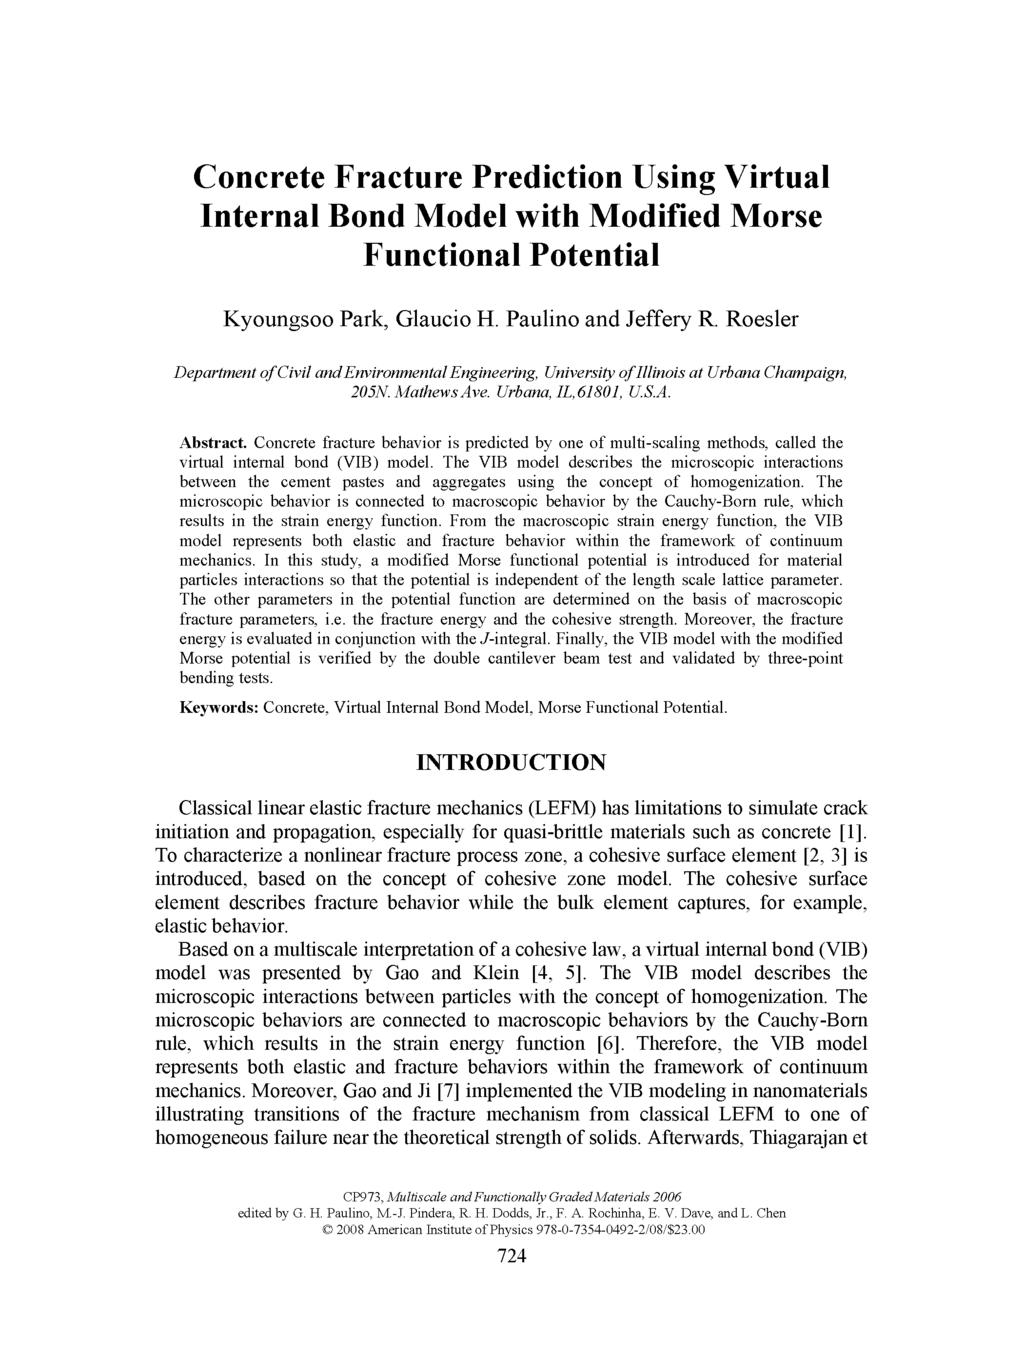 Concrete Fracture Prediction Using Virtual Internal Bond Model with Modified Morse Functional Potential Kyoungsoo Park, Glaucio H. Paulino and Jeffery R.